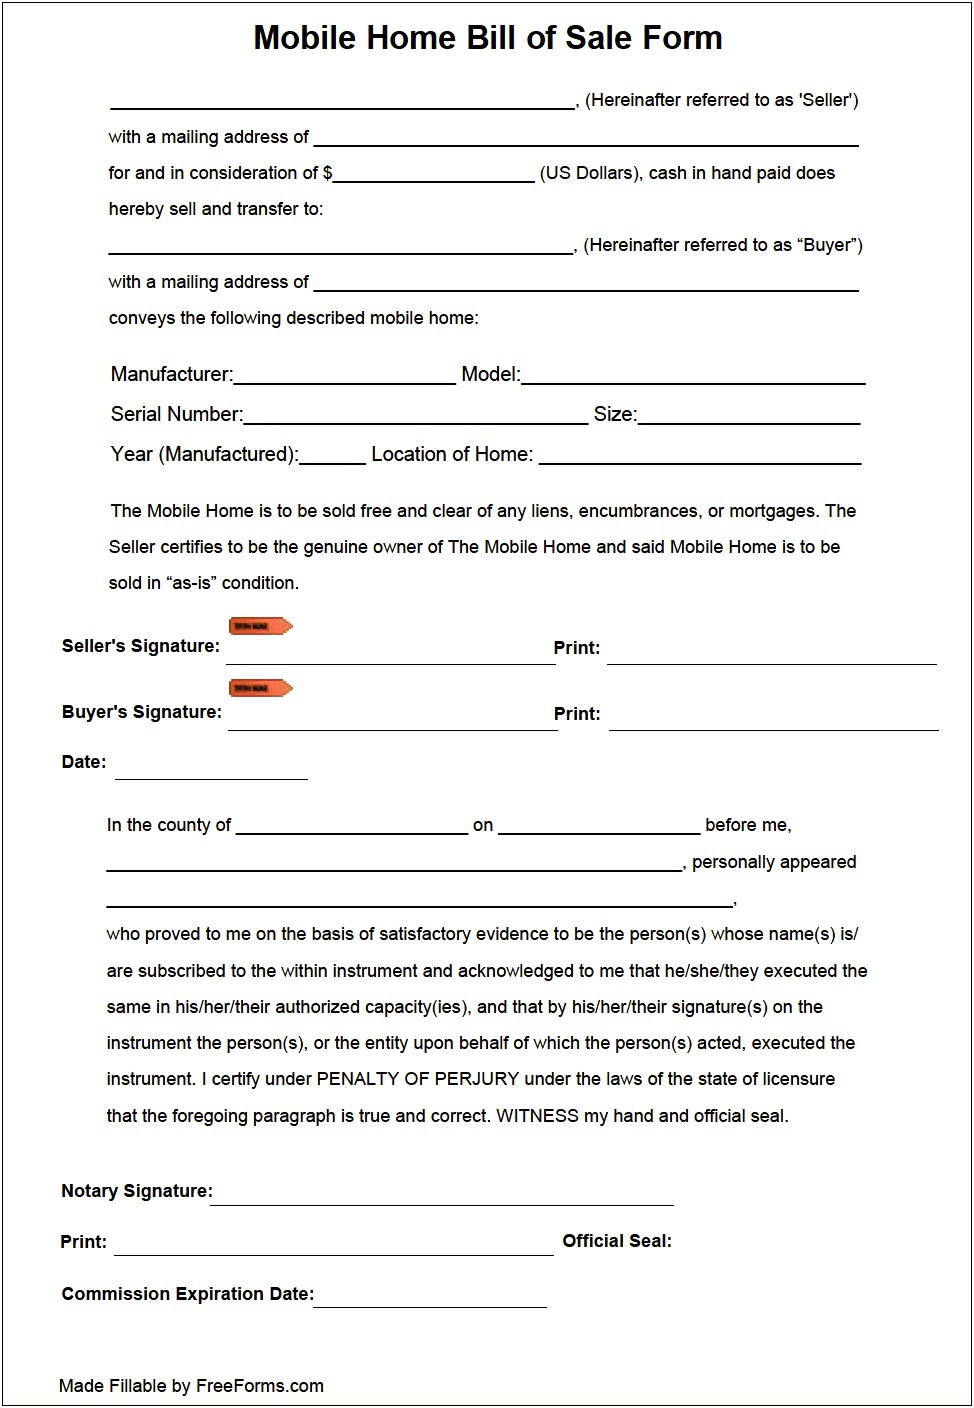 Free Gift Deed Template For Texas Free Download